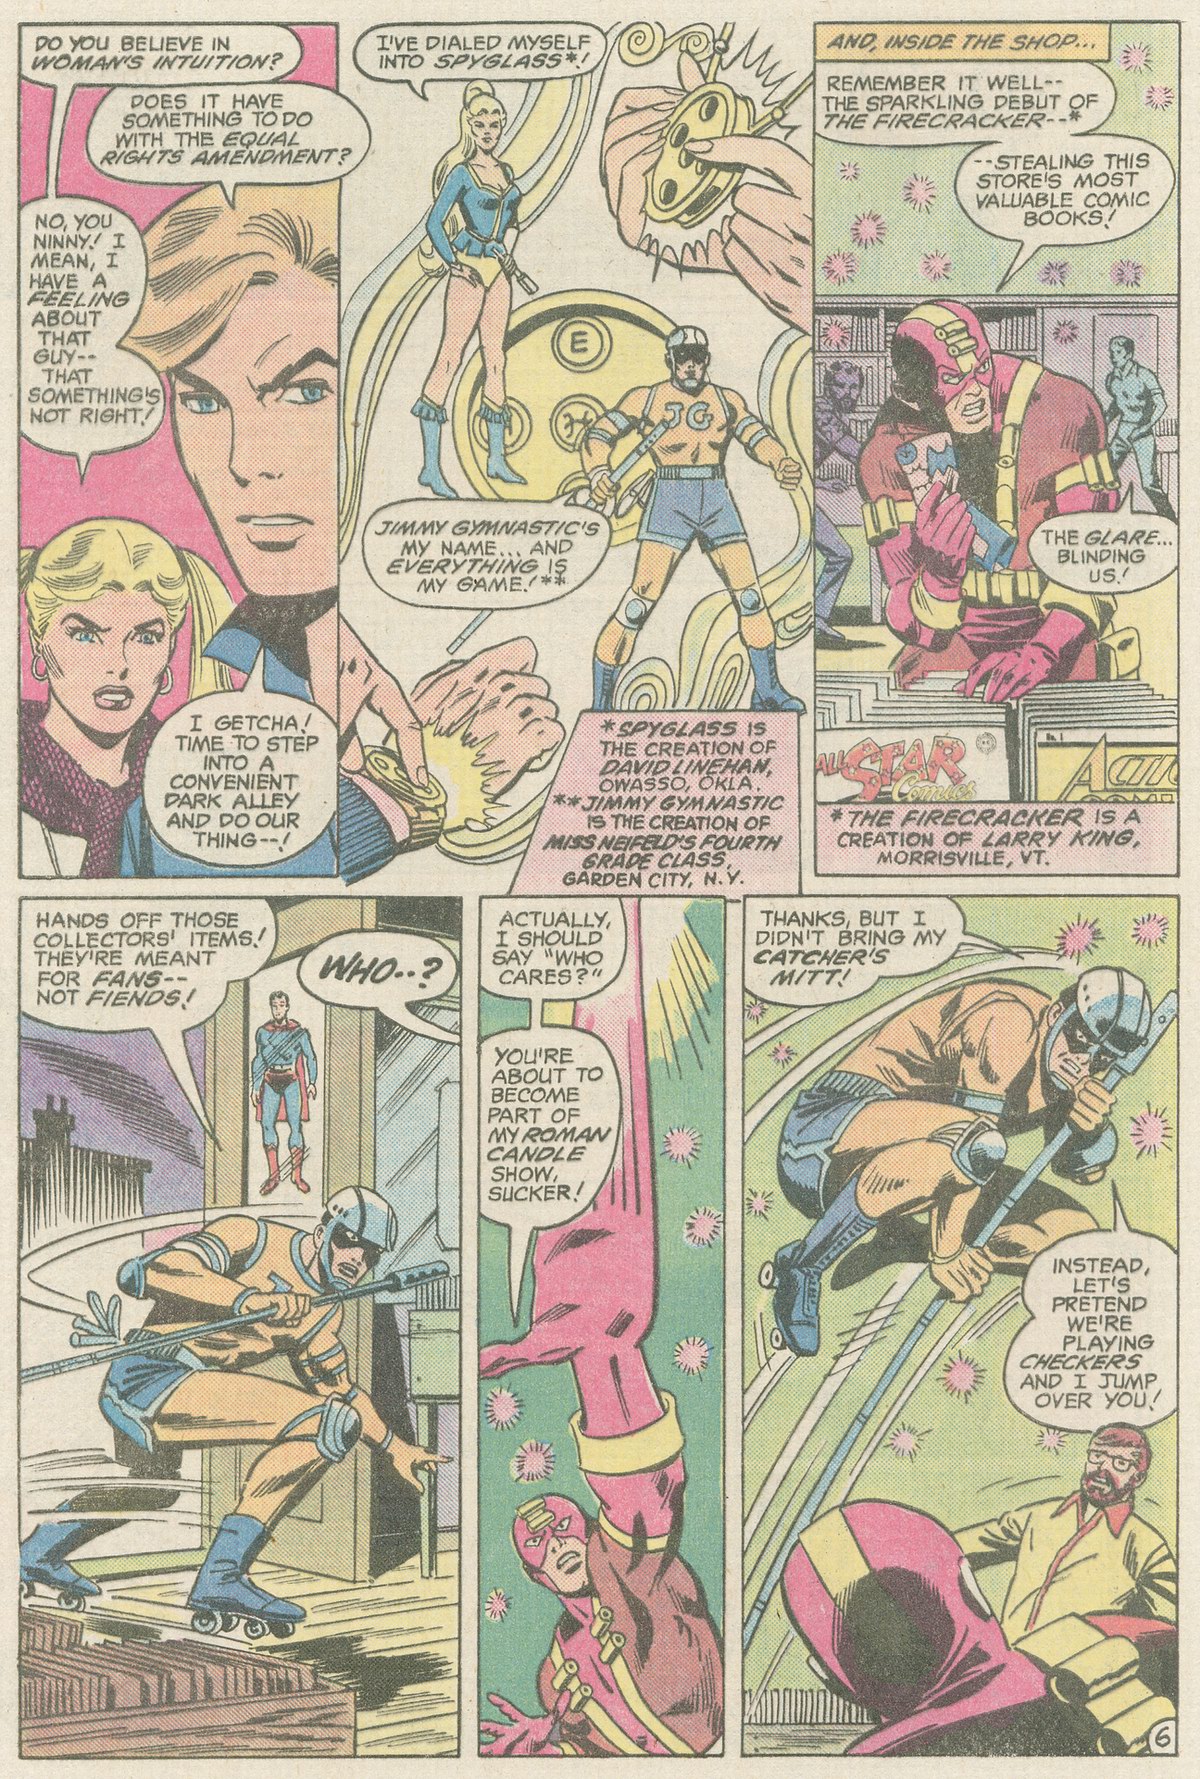 The New Adventures of Superboy 37 Page 23